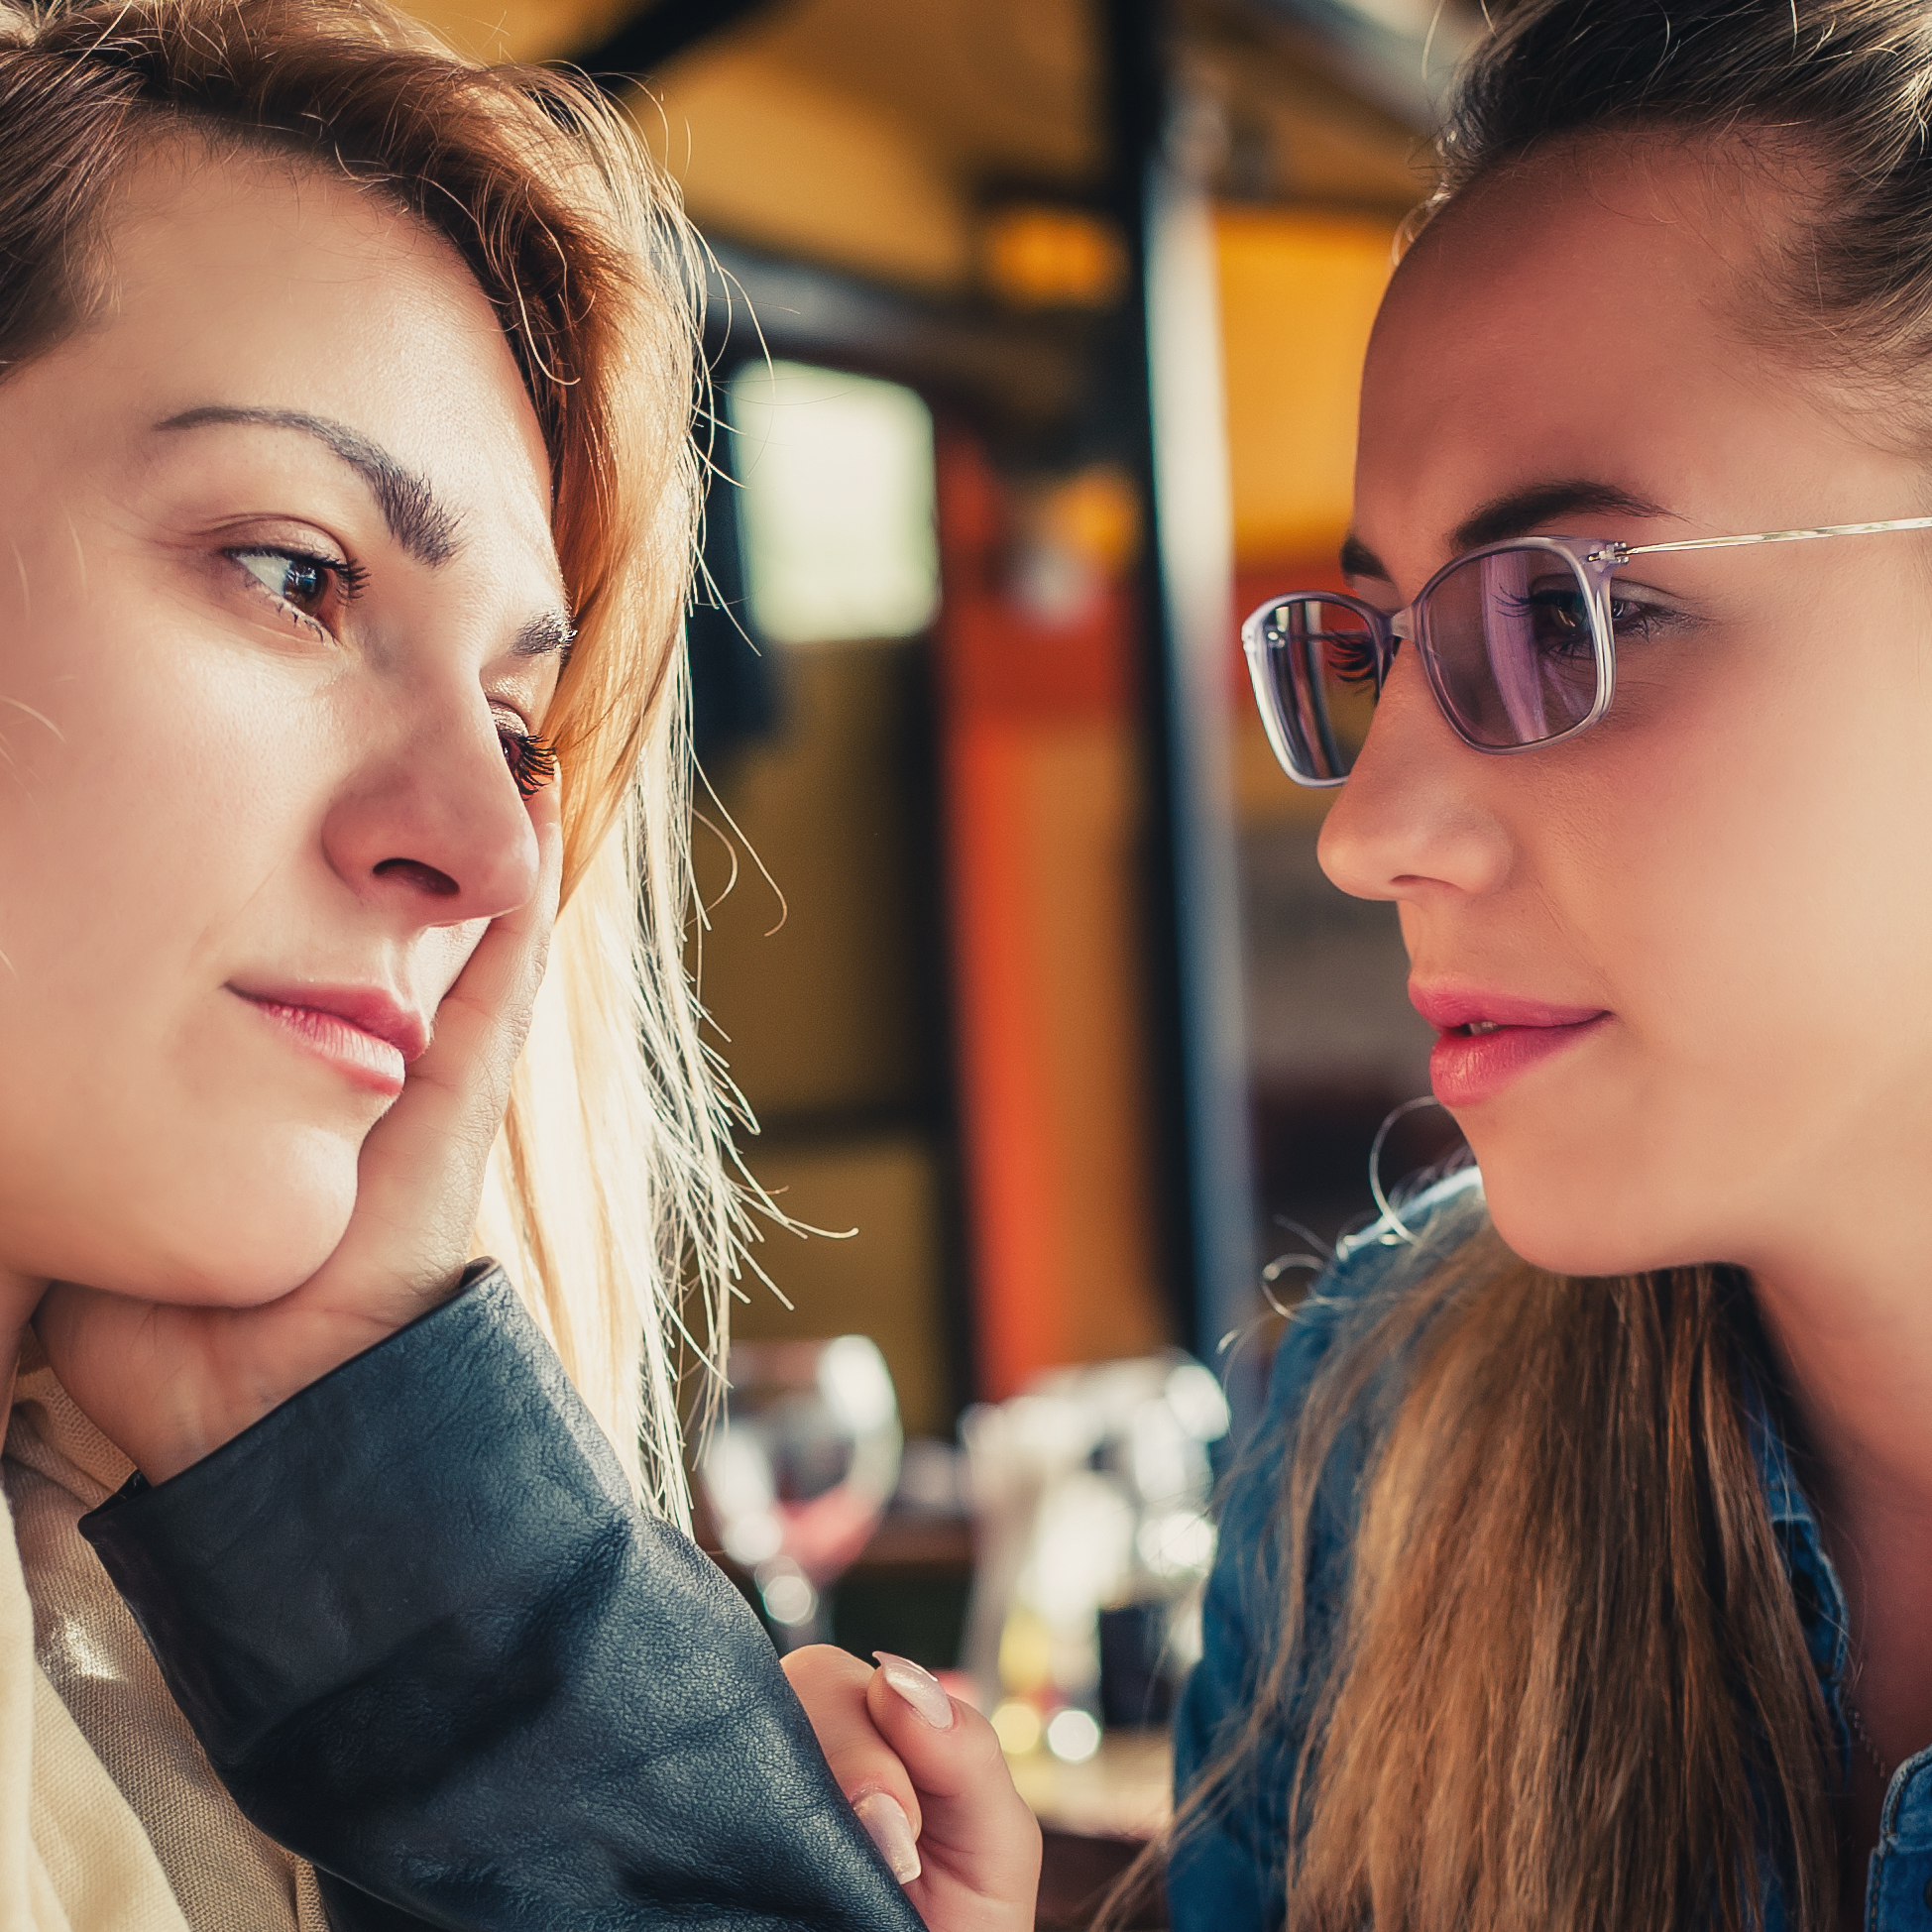 two young women talking in restaurant serious conversation looking sad